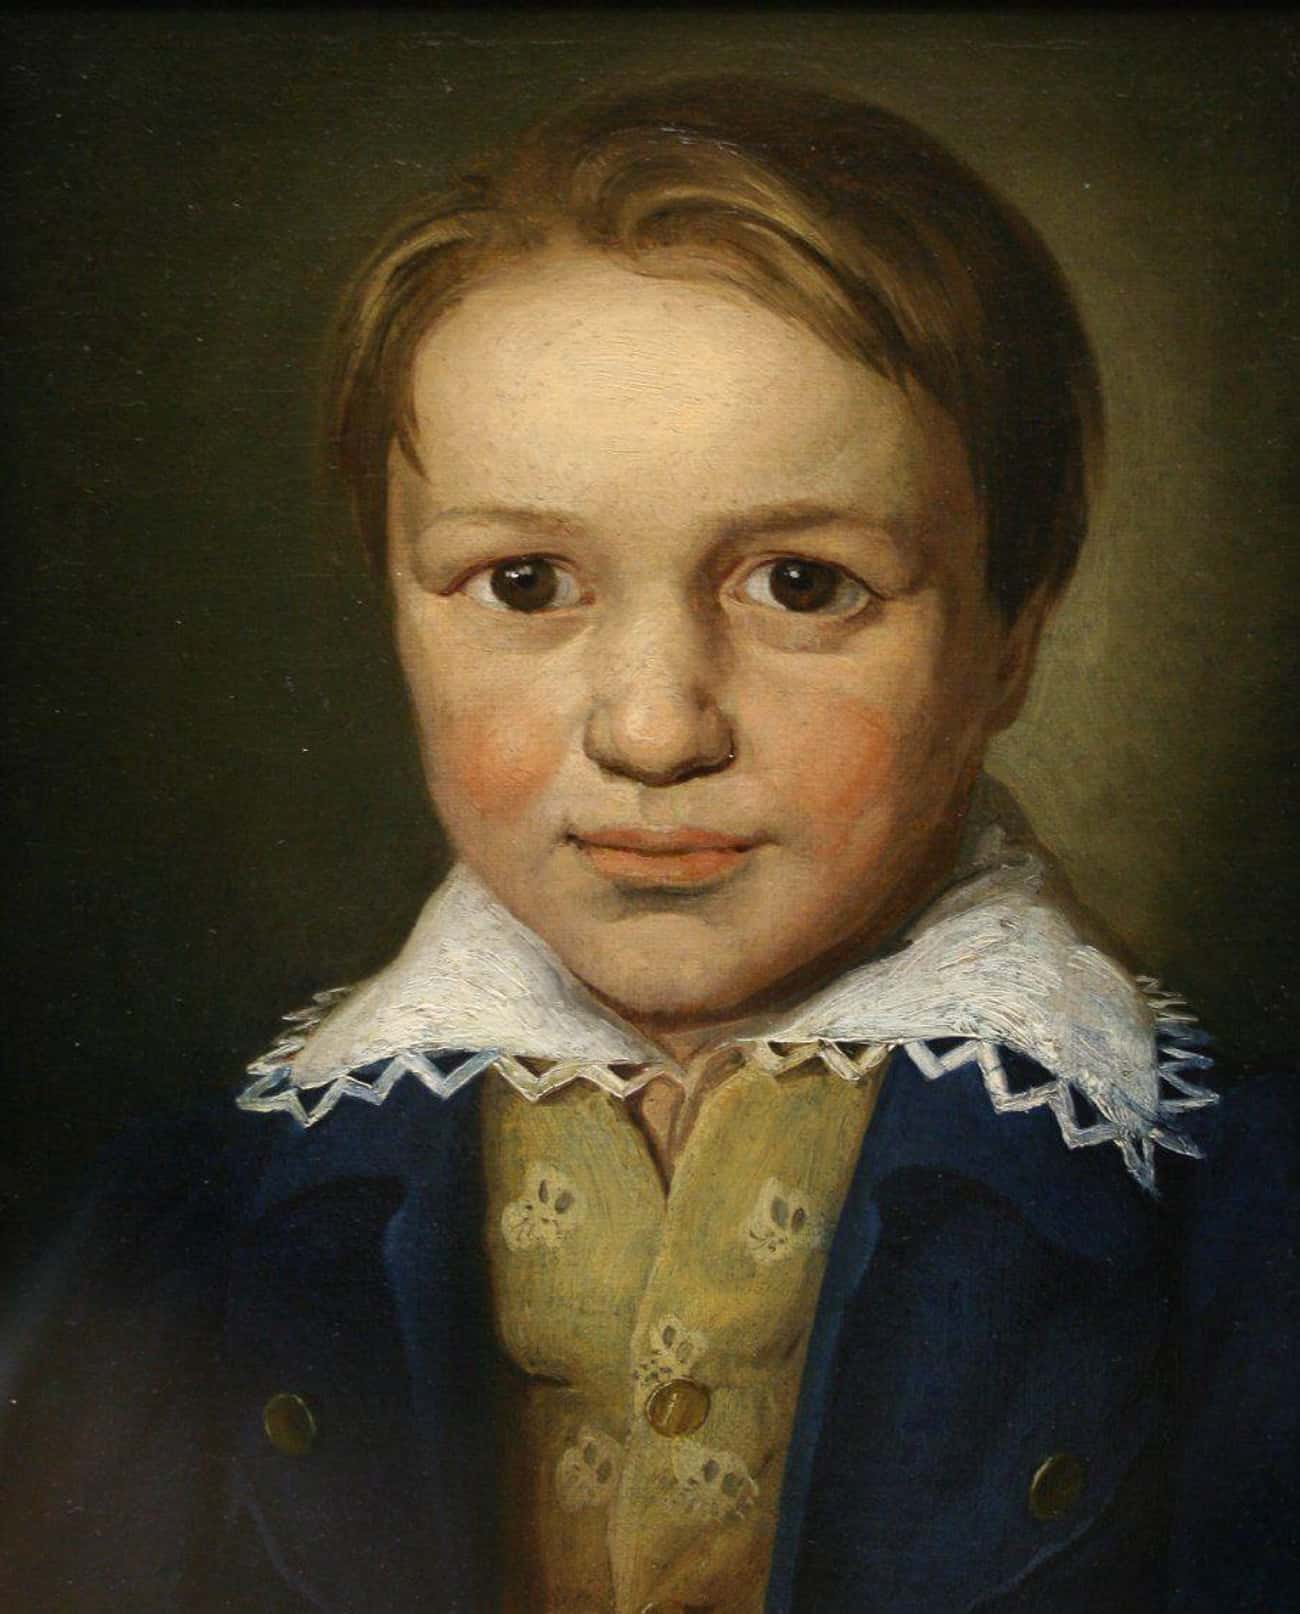 His Alcoholic Father Abused And Berated Him In An Attempt To Make Him The Next Mozart